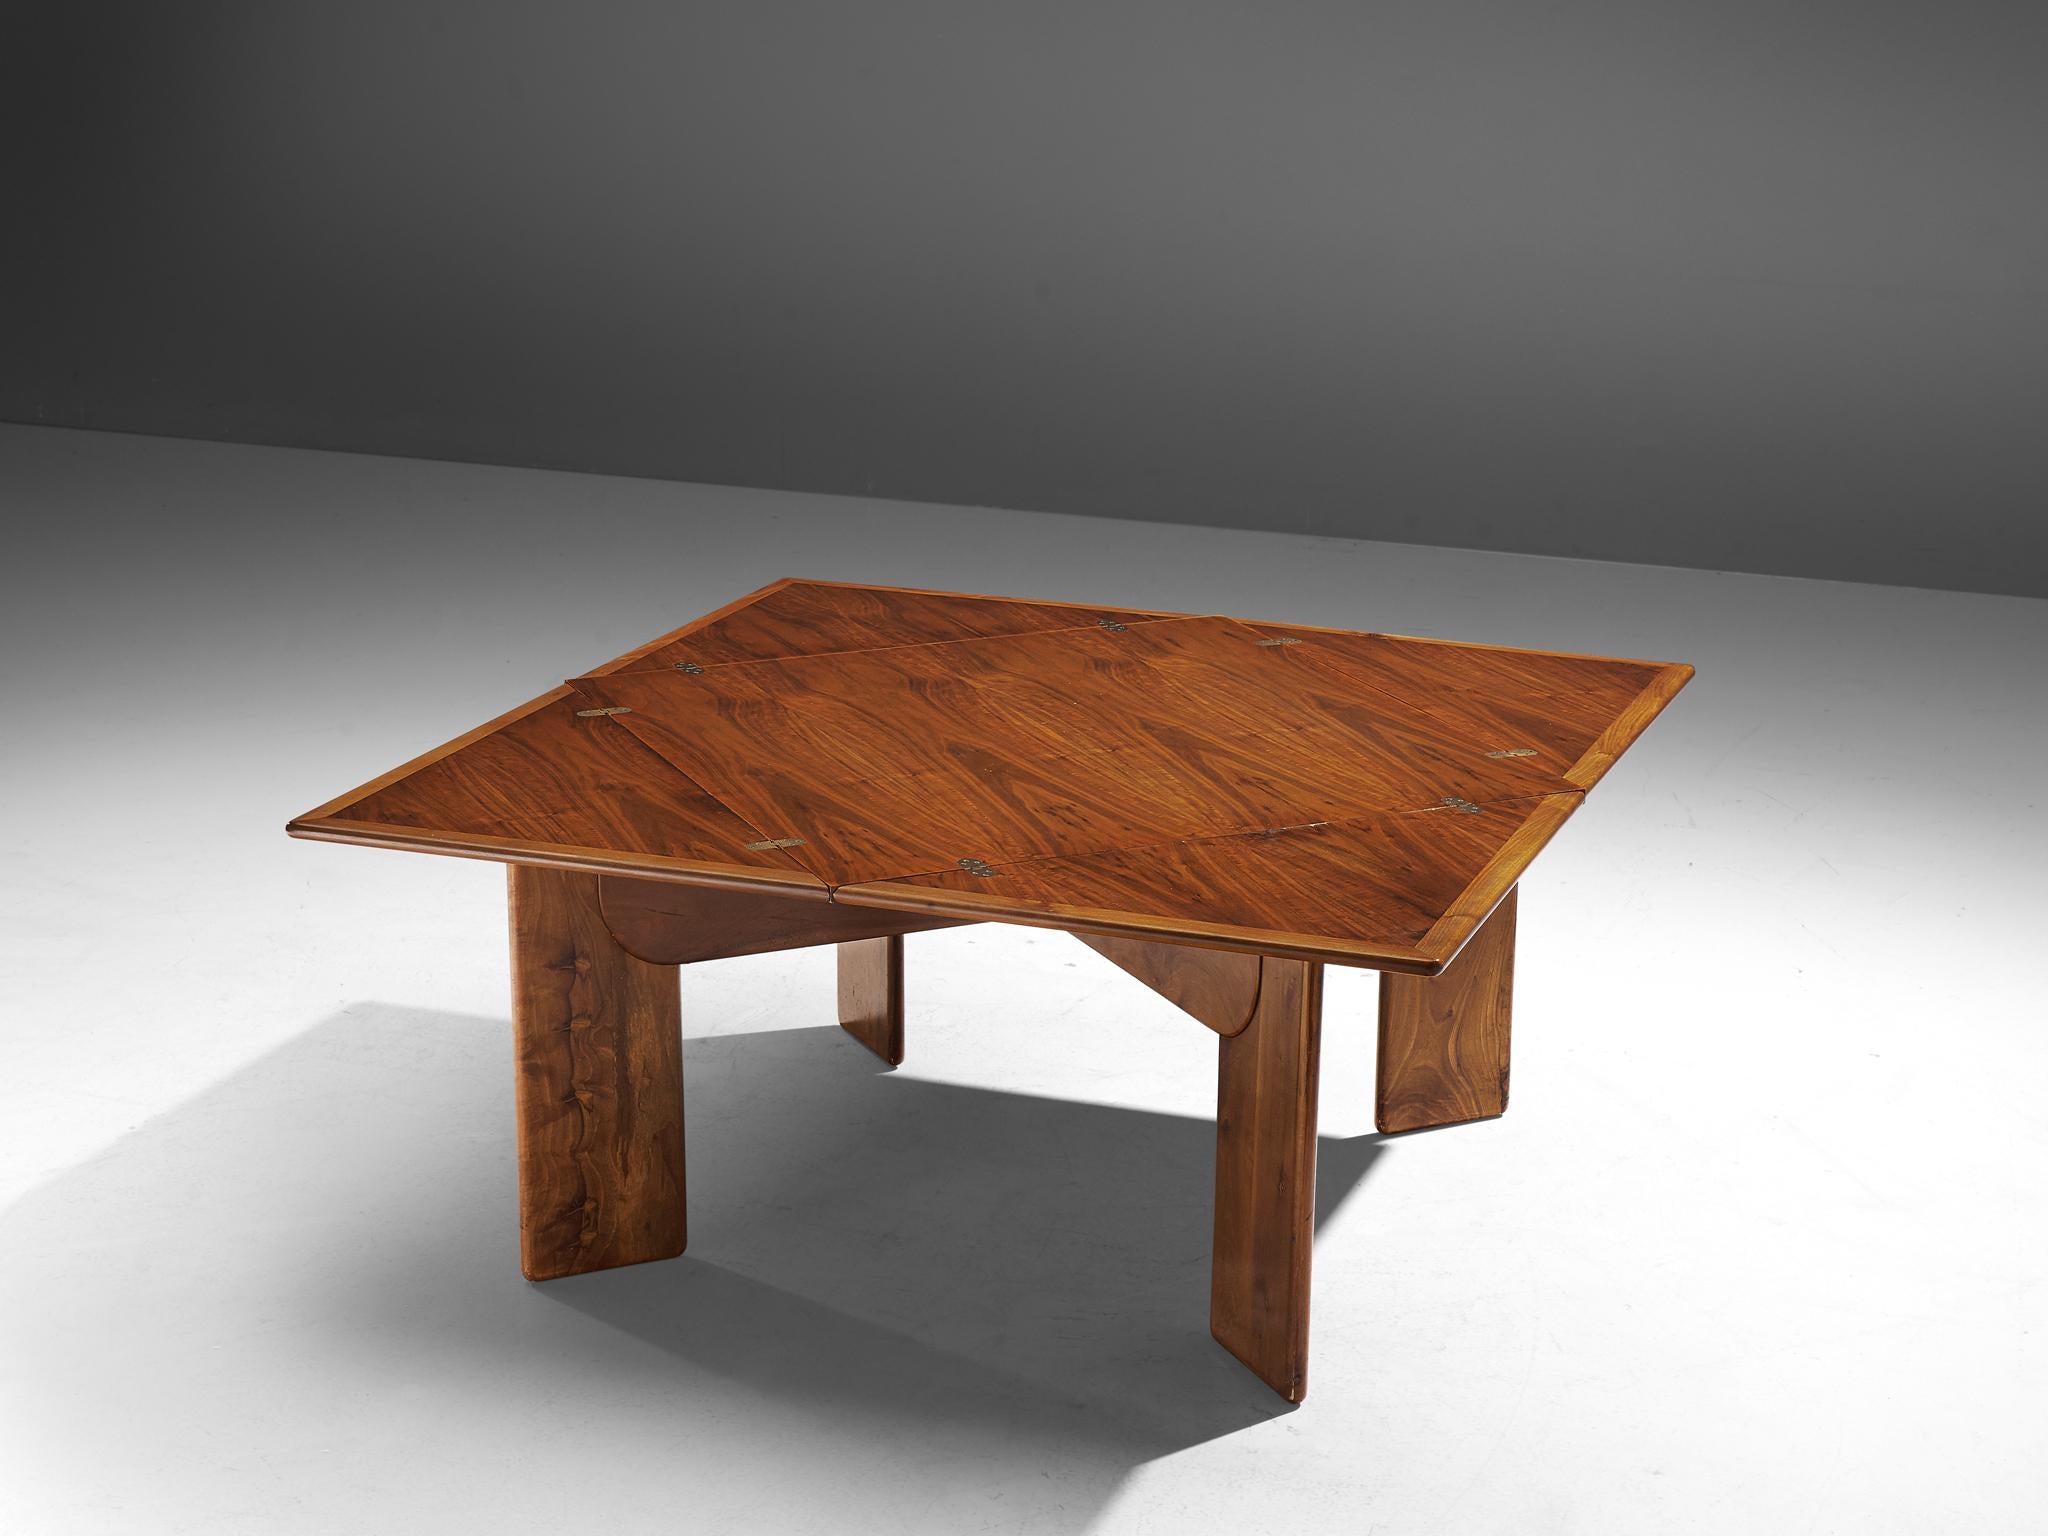 Extendable dining table, walnut and brass, Italy, 1970s.

Stunning square shaped dining table with a drop leaf table top. This dining table is manufactured in beautiful walnut wood, featuring striking, warm tones in the grain. The unfolded